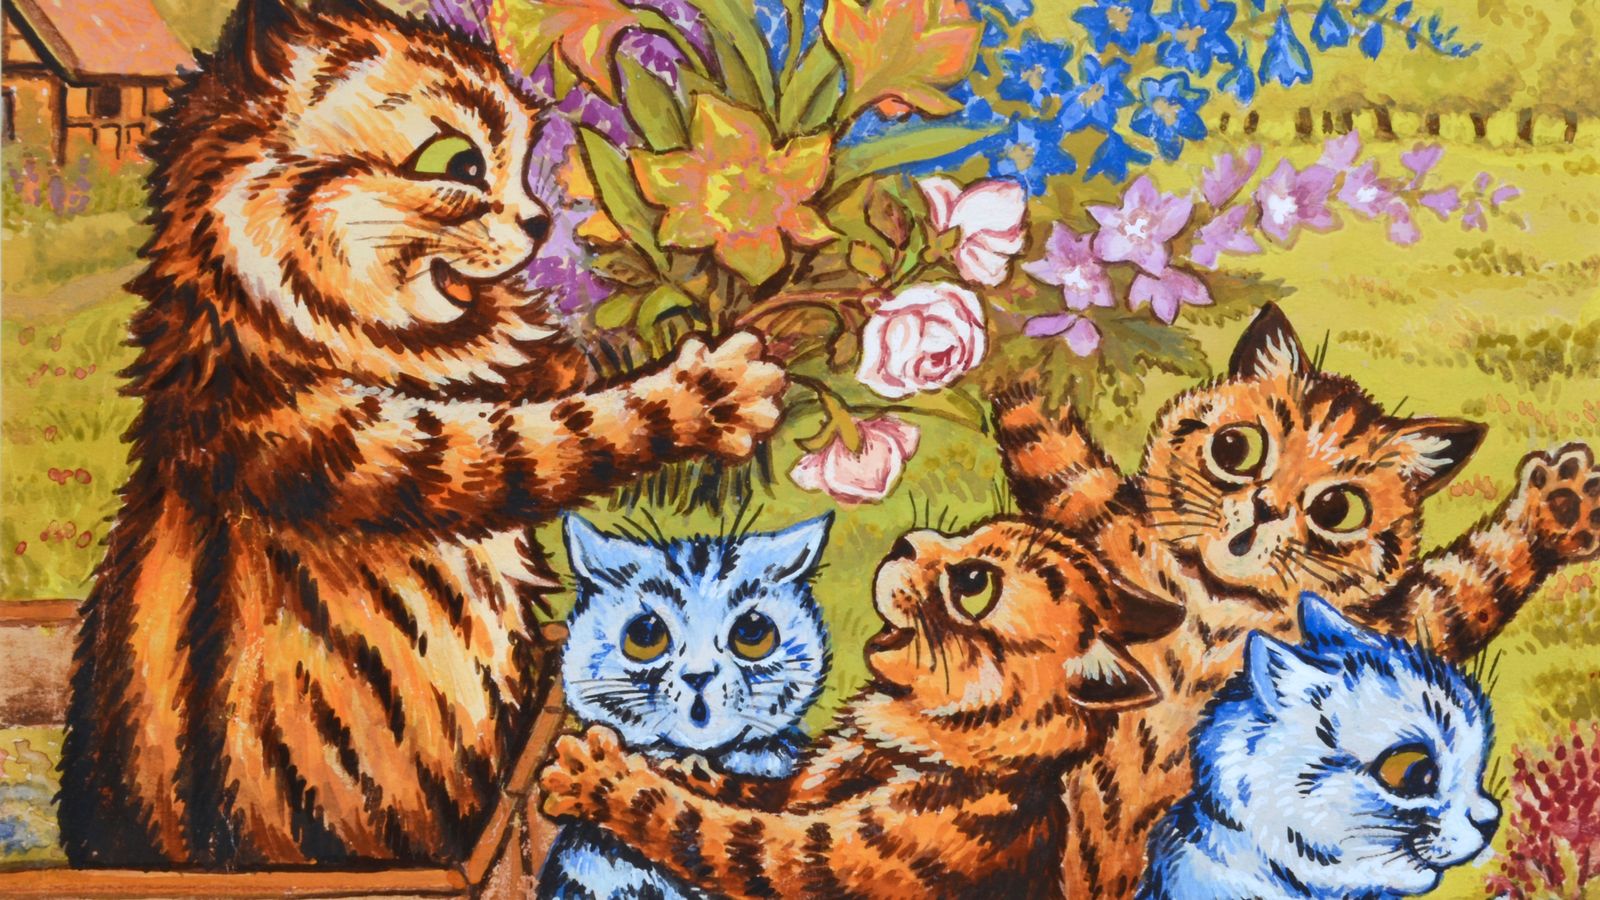 The Electrical Life Of Louis Wain: He was the eccentric artist who drew cats. Now, his story gets the Hollywood treatment | Ents & Arts News